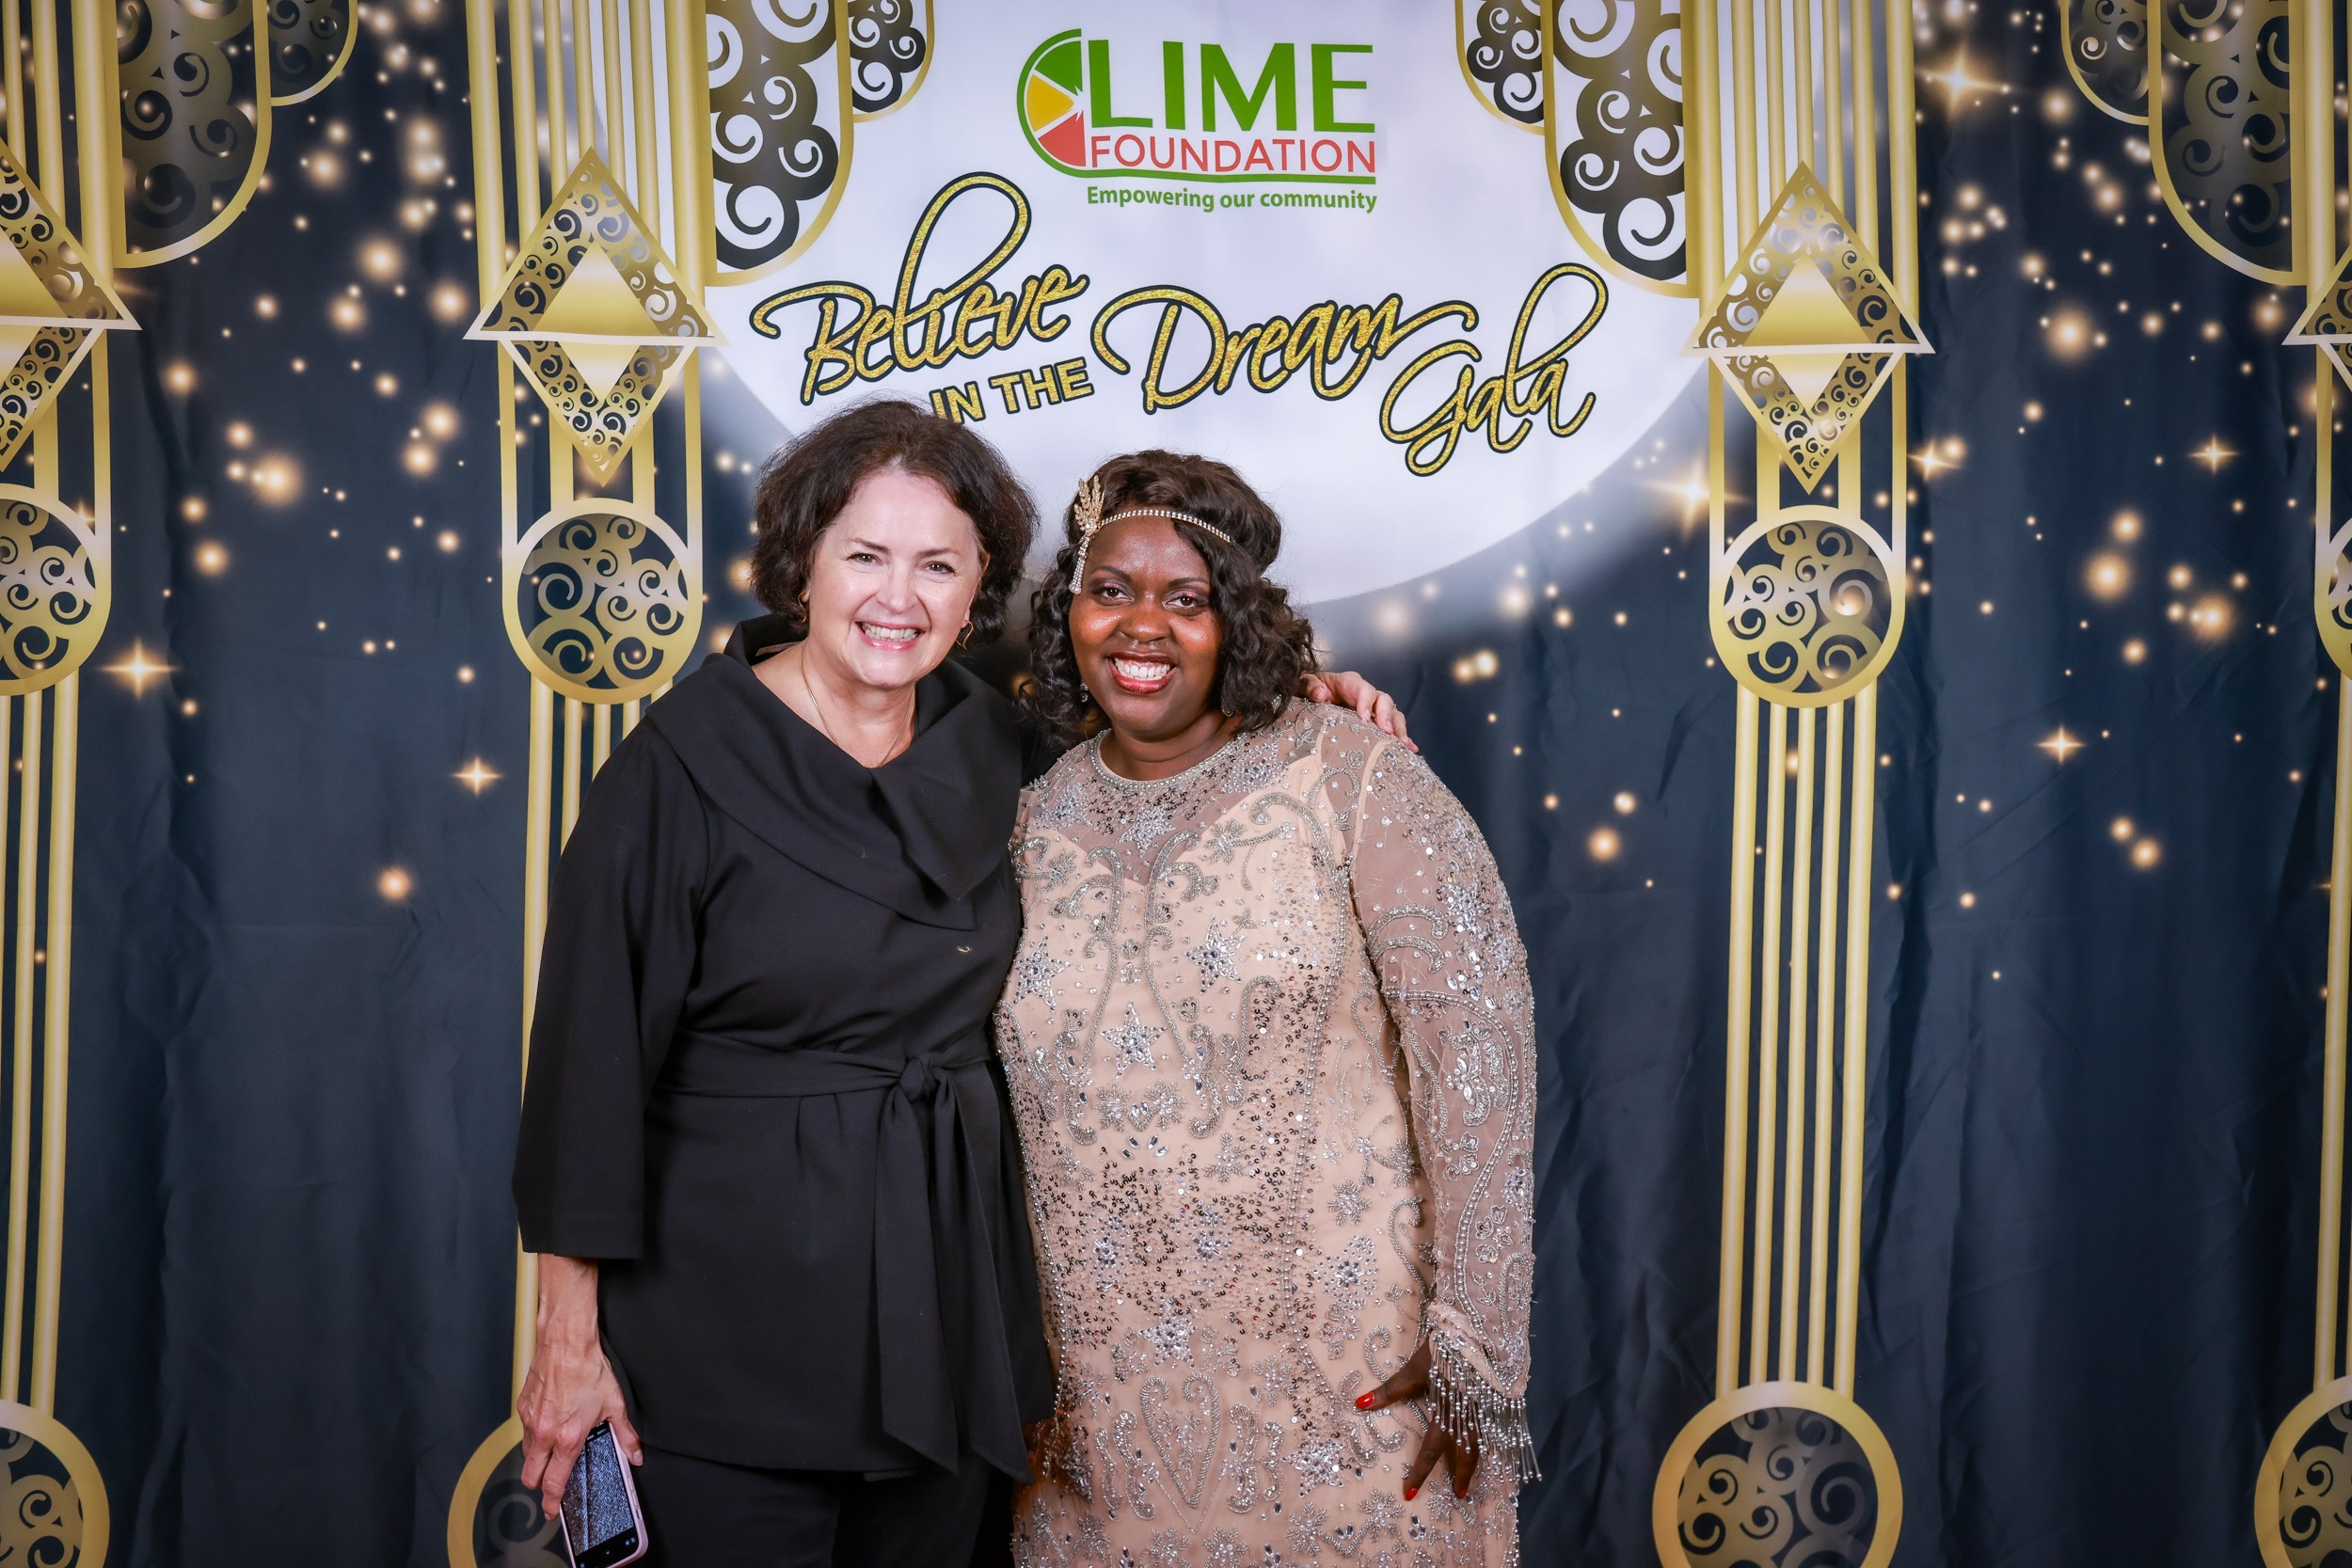 Two women posing for a photo at an event held by The LIME Foundation of Santa Rosa.